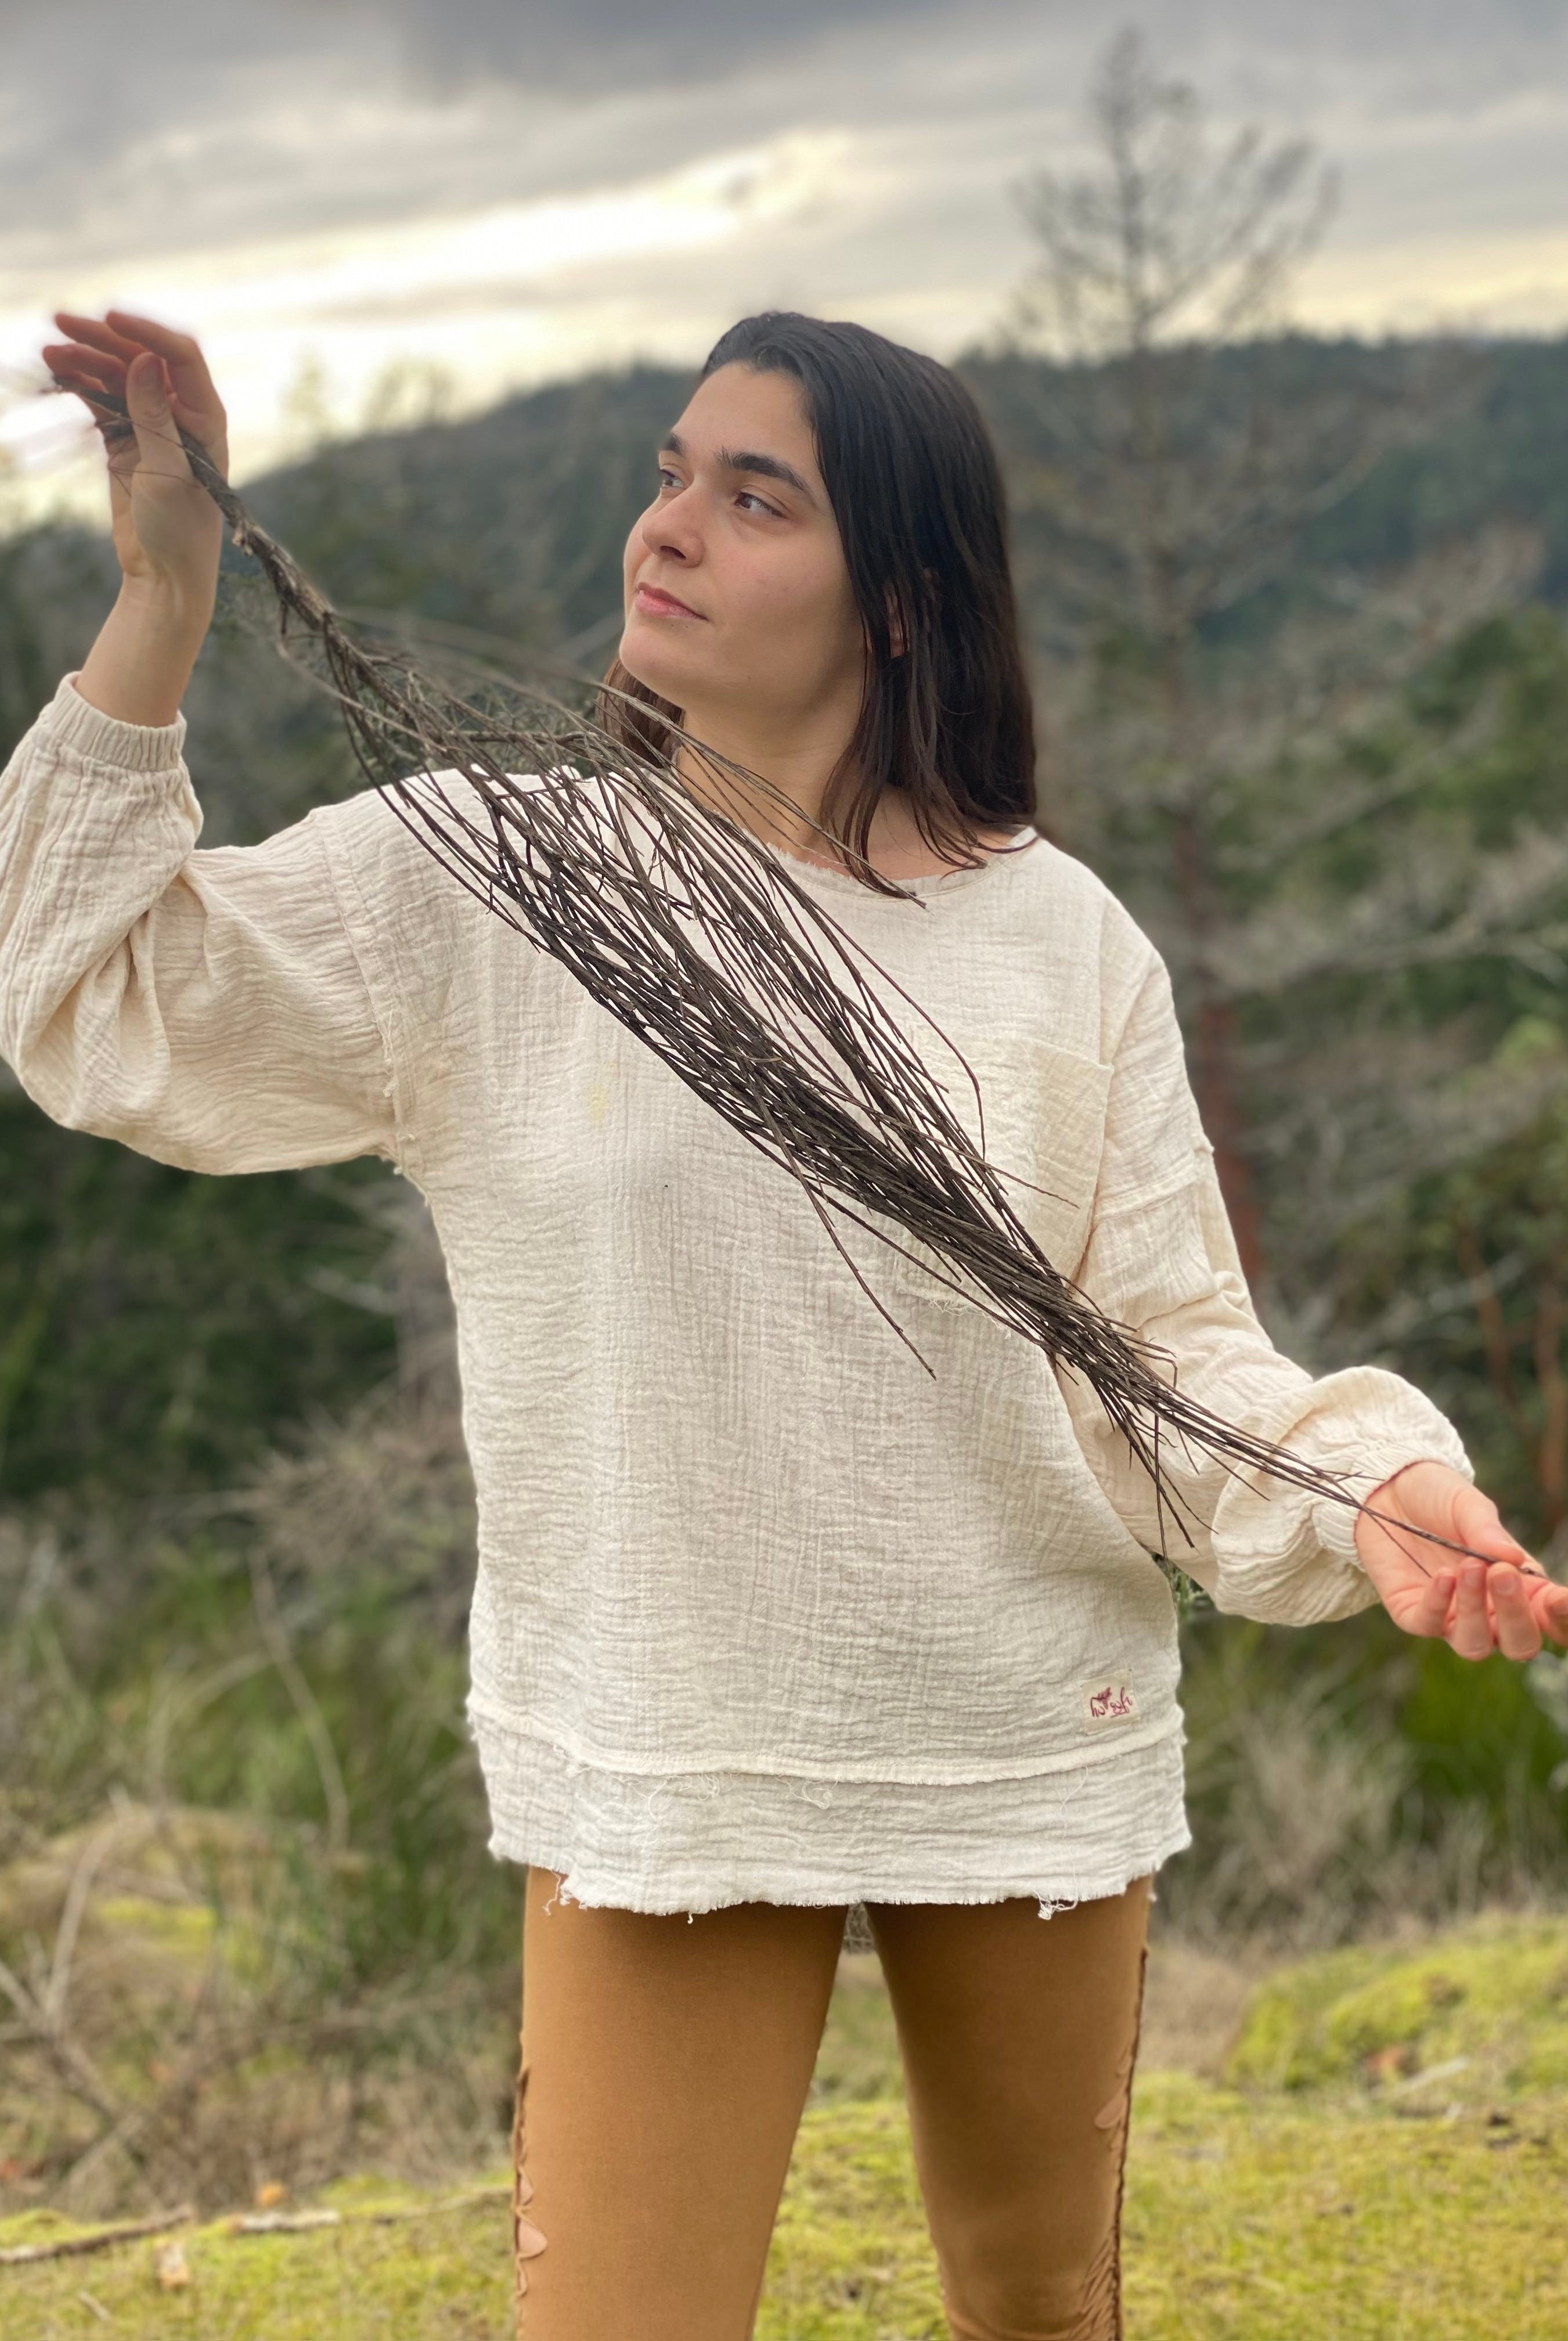 This image shows a woman in a natural outdoor setting, enjoying a moment of tranquility. She is dressed in an off-white, textured, long-sleeve blouse with a relaxed fit, paired with form-fitting, olive-green leggings and appears to be holding a thin branch or twig, eyes closed, seemingly appreciating the scent or texture of nature's offering.